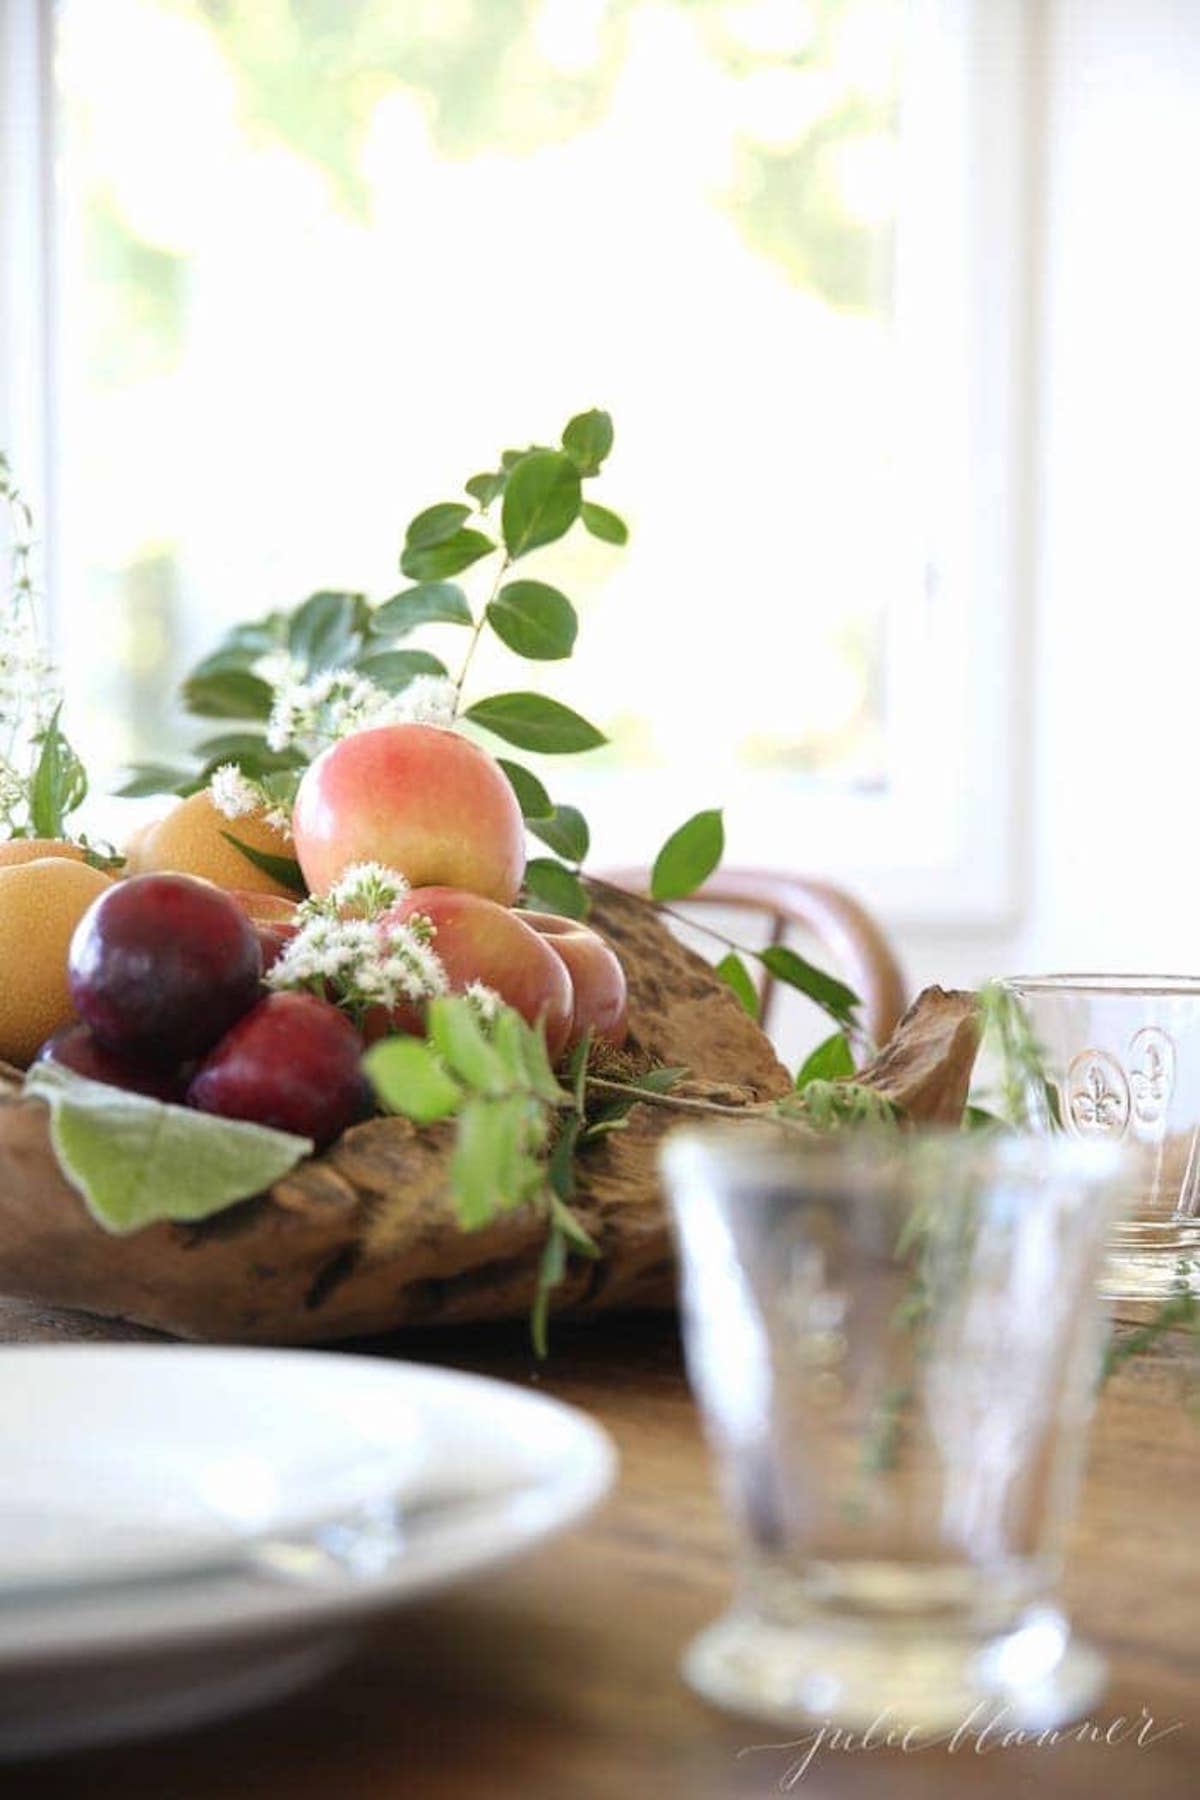 A festive Thanksgiving centerpiece featuring a wooden bowl brimming with an assortment of fresh fruit and vibrant greenery, adorning the holiday table.